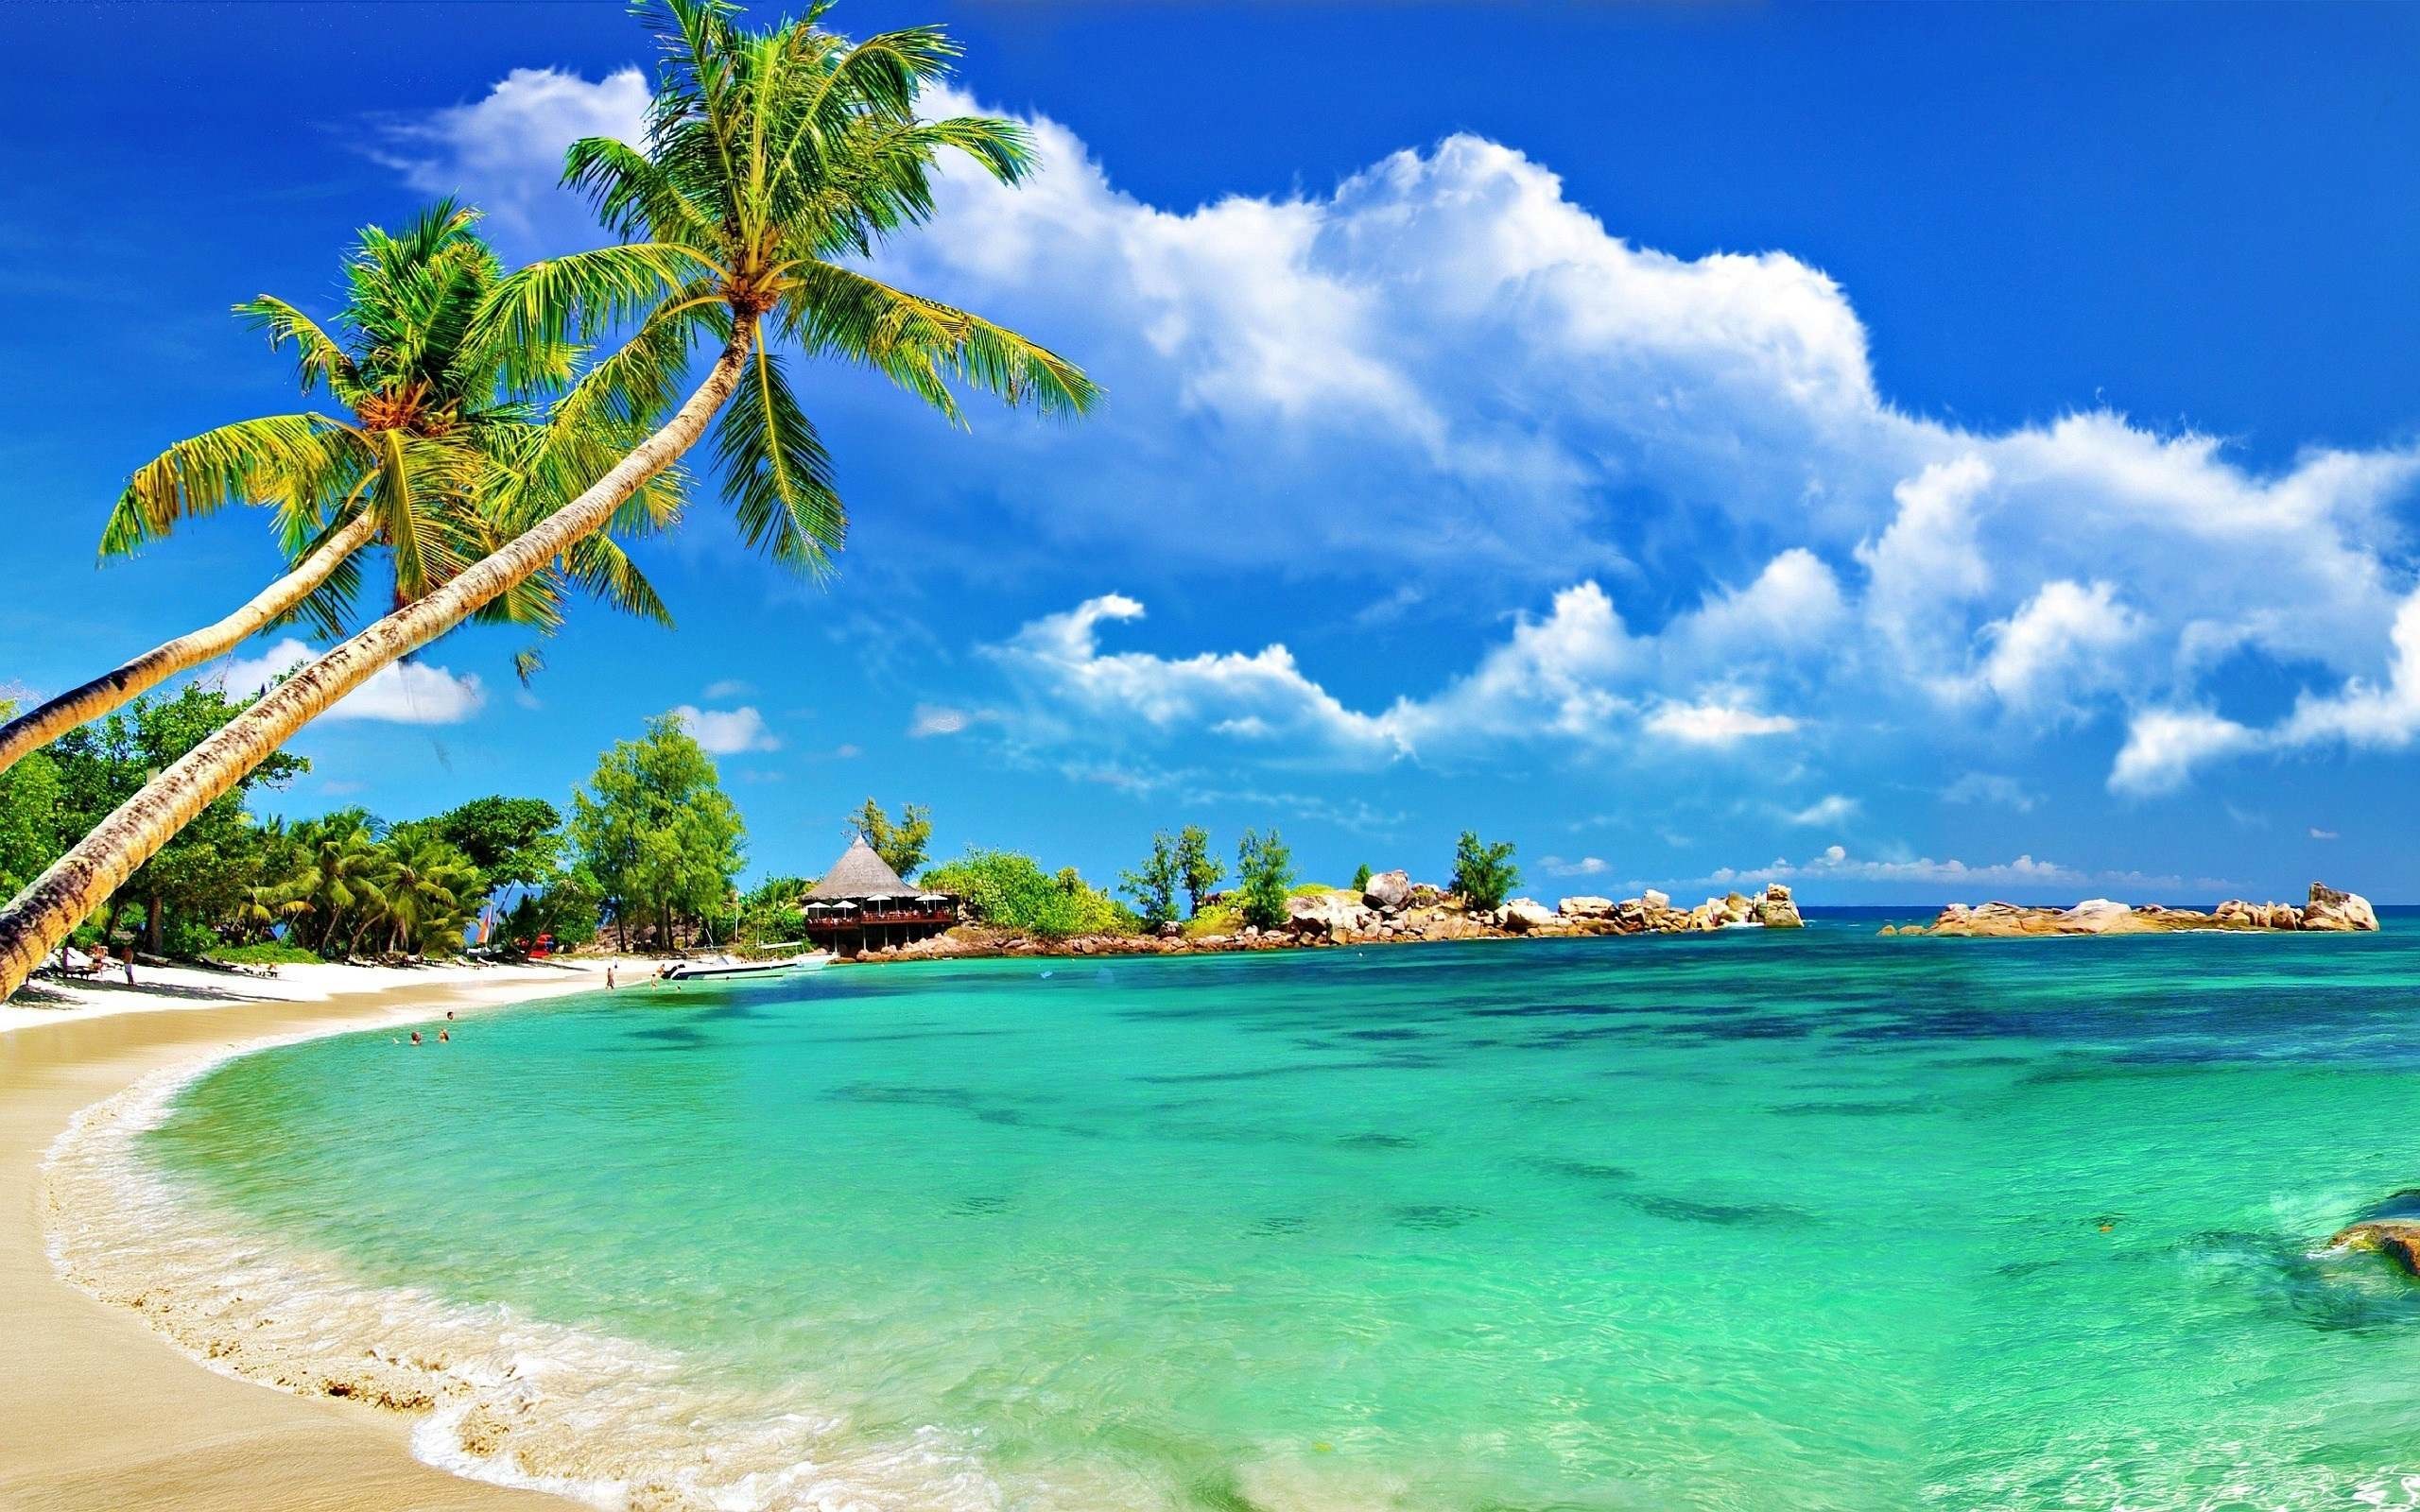 2560x1600 Awesome, Tropical, Beaches, Full, Screen, High, Resolution, Wallpaper,  Free, Desktop, Background, Photos, Amazing, Download Wallpaper, Stock  Photos, ...